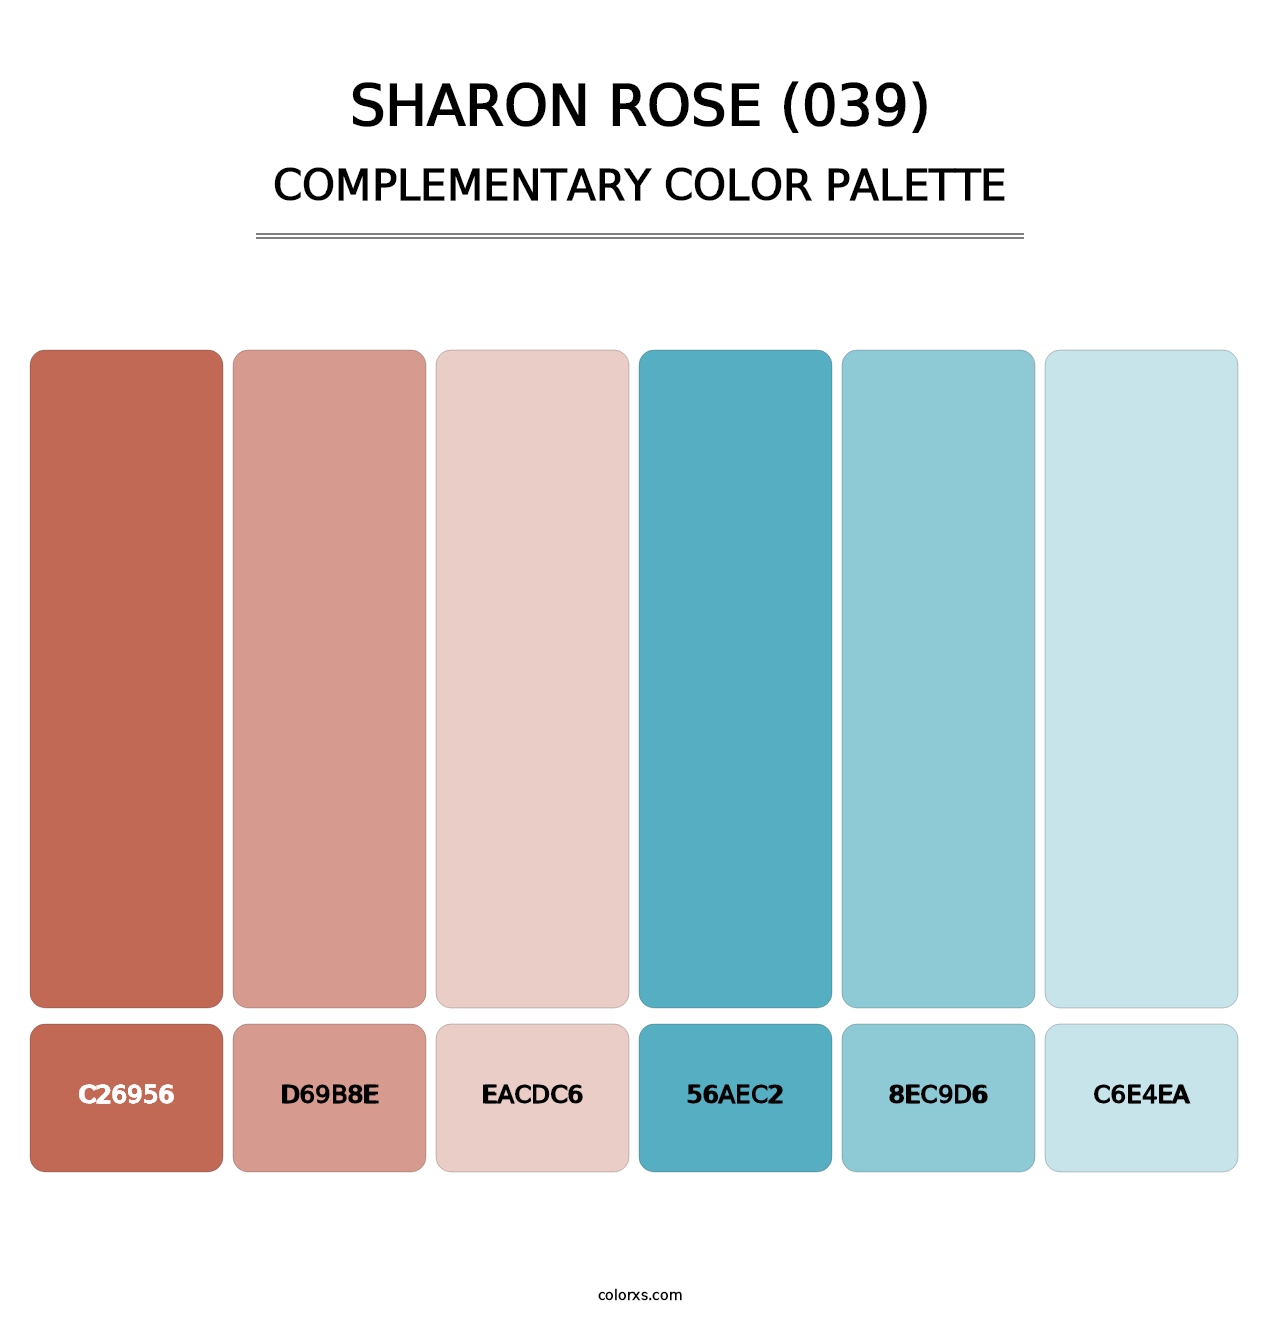 Sharon Rose (039) - Complementary Color Palette